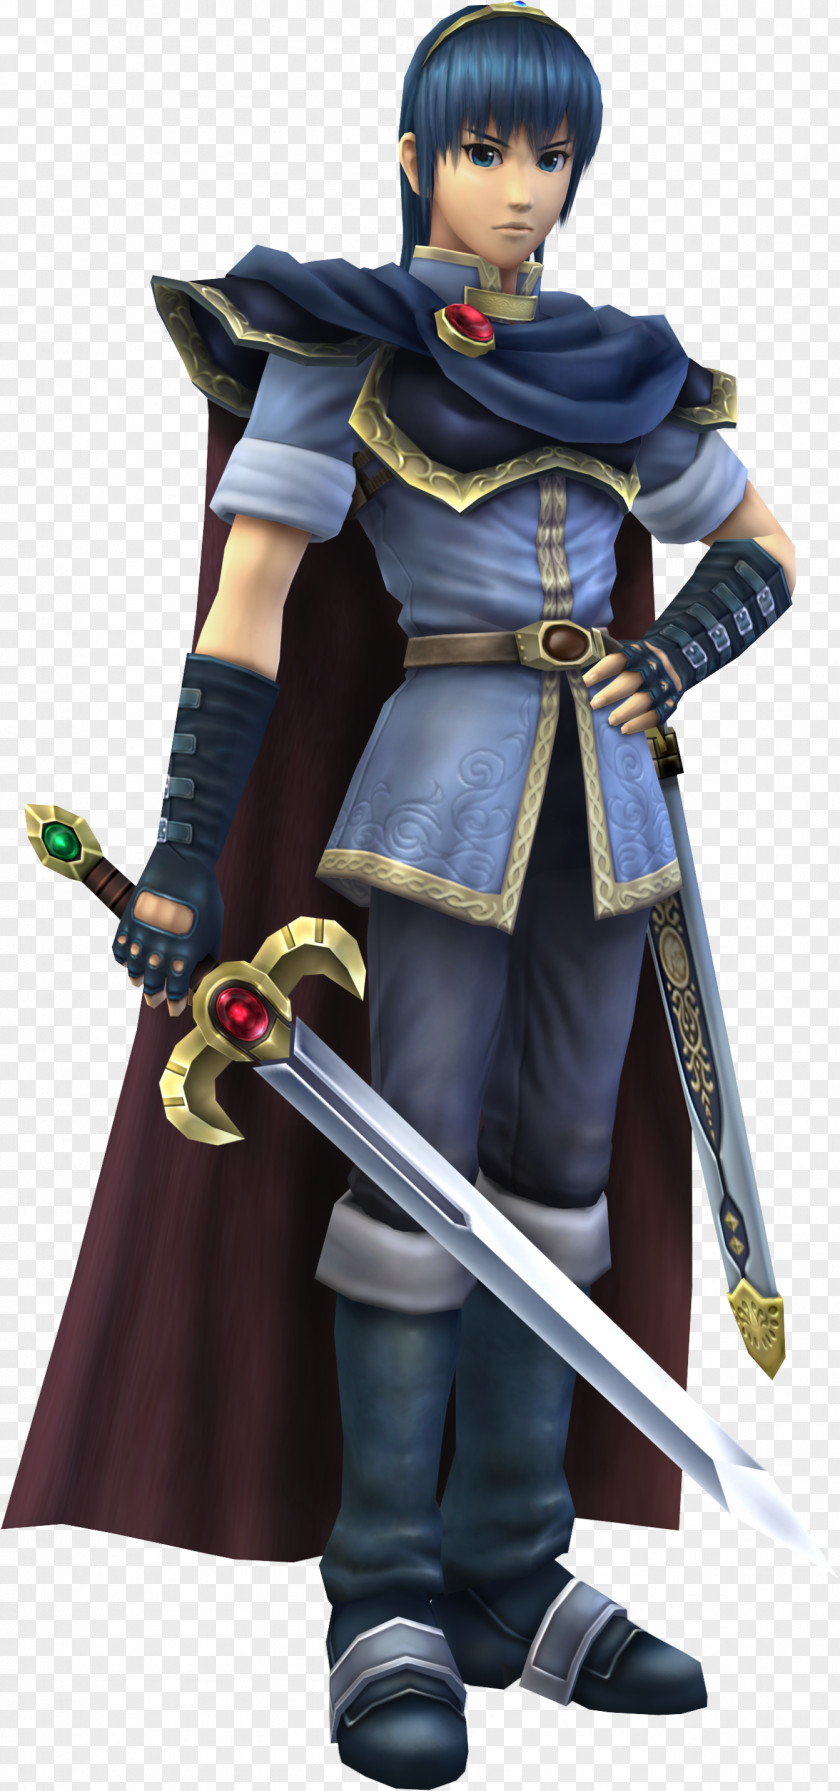 Prince Super Smash Bros. Brawl Melee For Nintendo 3DS And Wii U Fire Emblem: Mystery Of The Emblem PNG